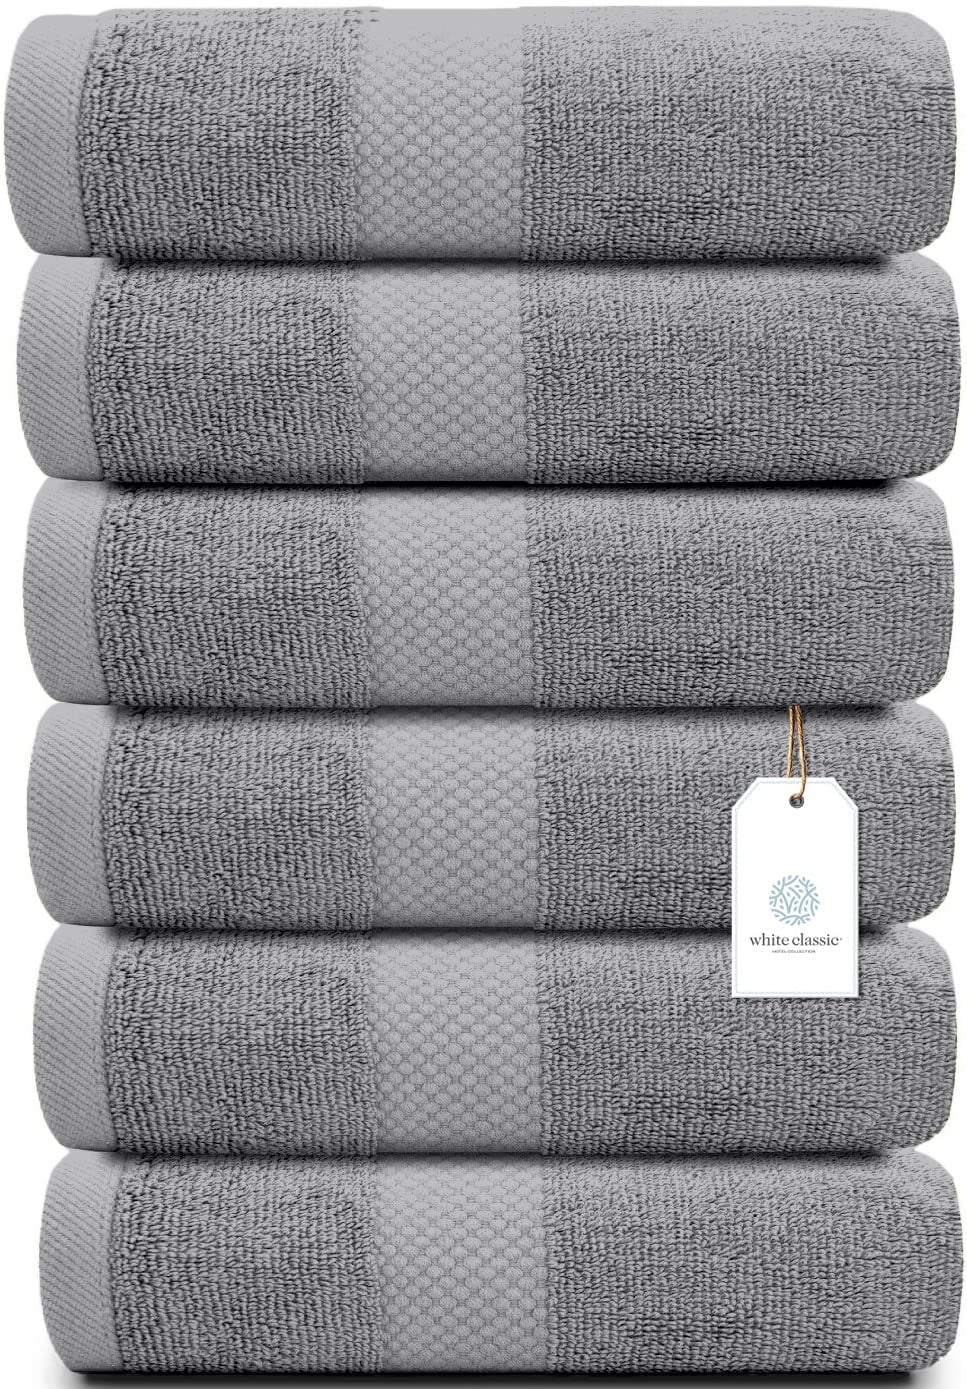 Orighty 6-Pack White Hand Towels - Quick Drying & Absorbent Microfiber  Bathroom Hand Towel 16x28 inches - Lightweight & Thin White Towels - Multi